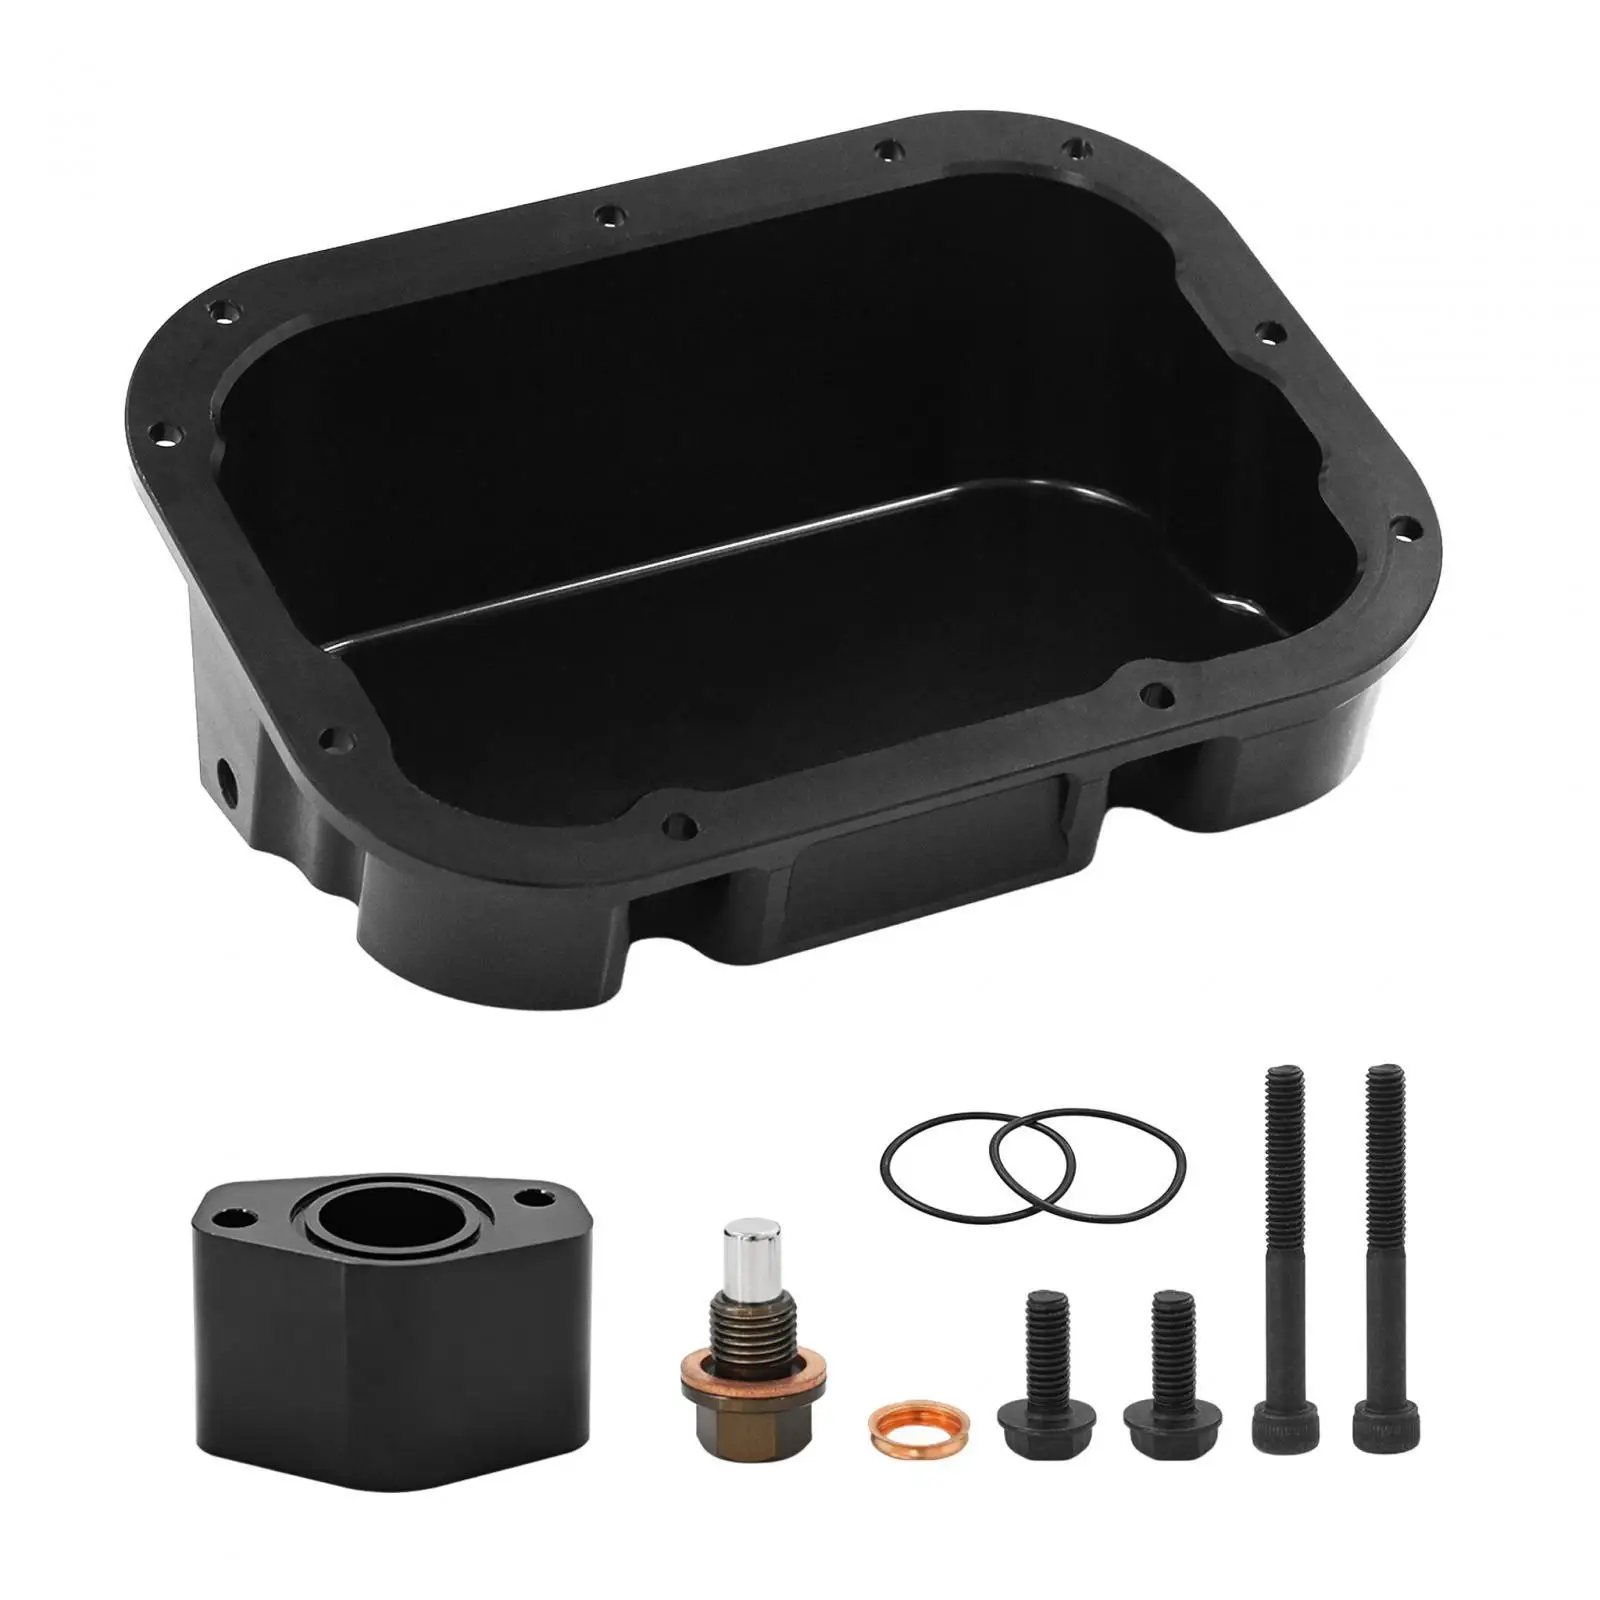 

Engine Oil Sump Pan Multiuse for GTR R35 09-19VR38dett Aluminum Alloy Auto Transmission Oil Pan for Car Replacements